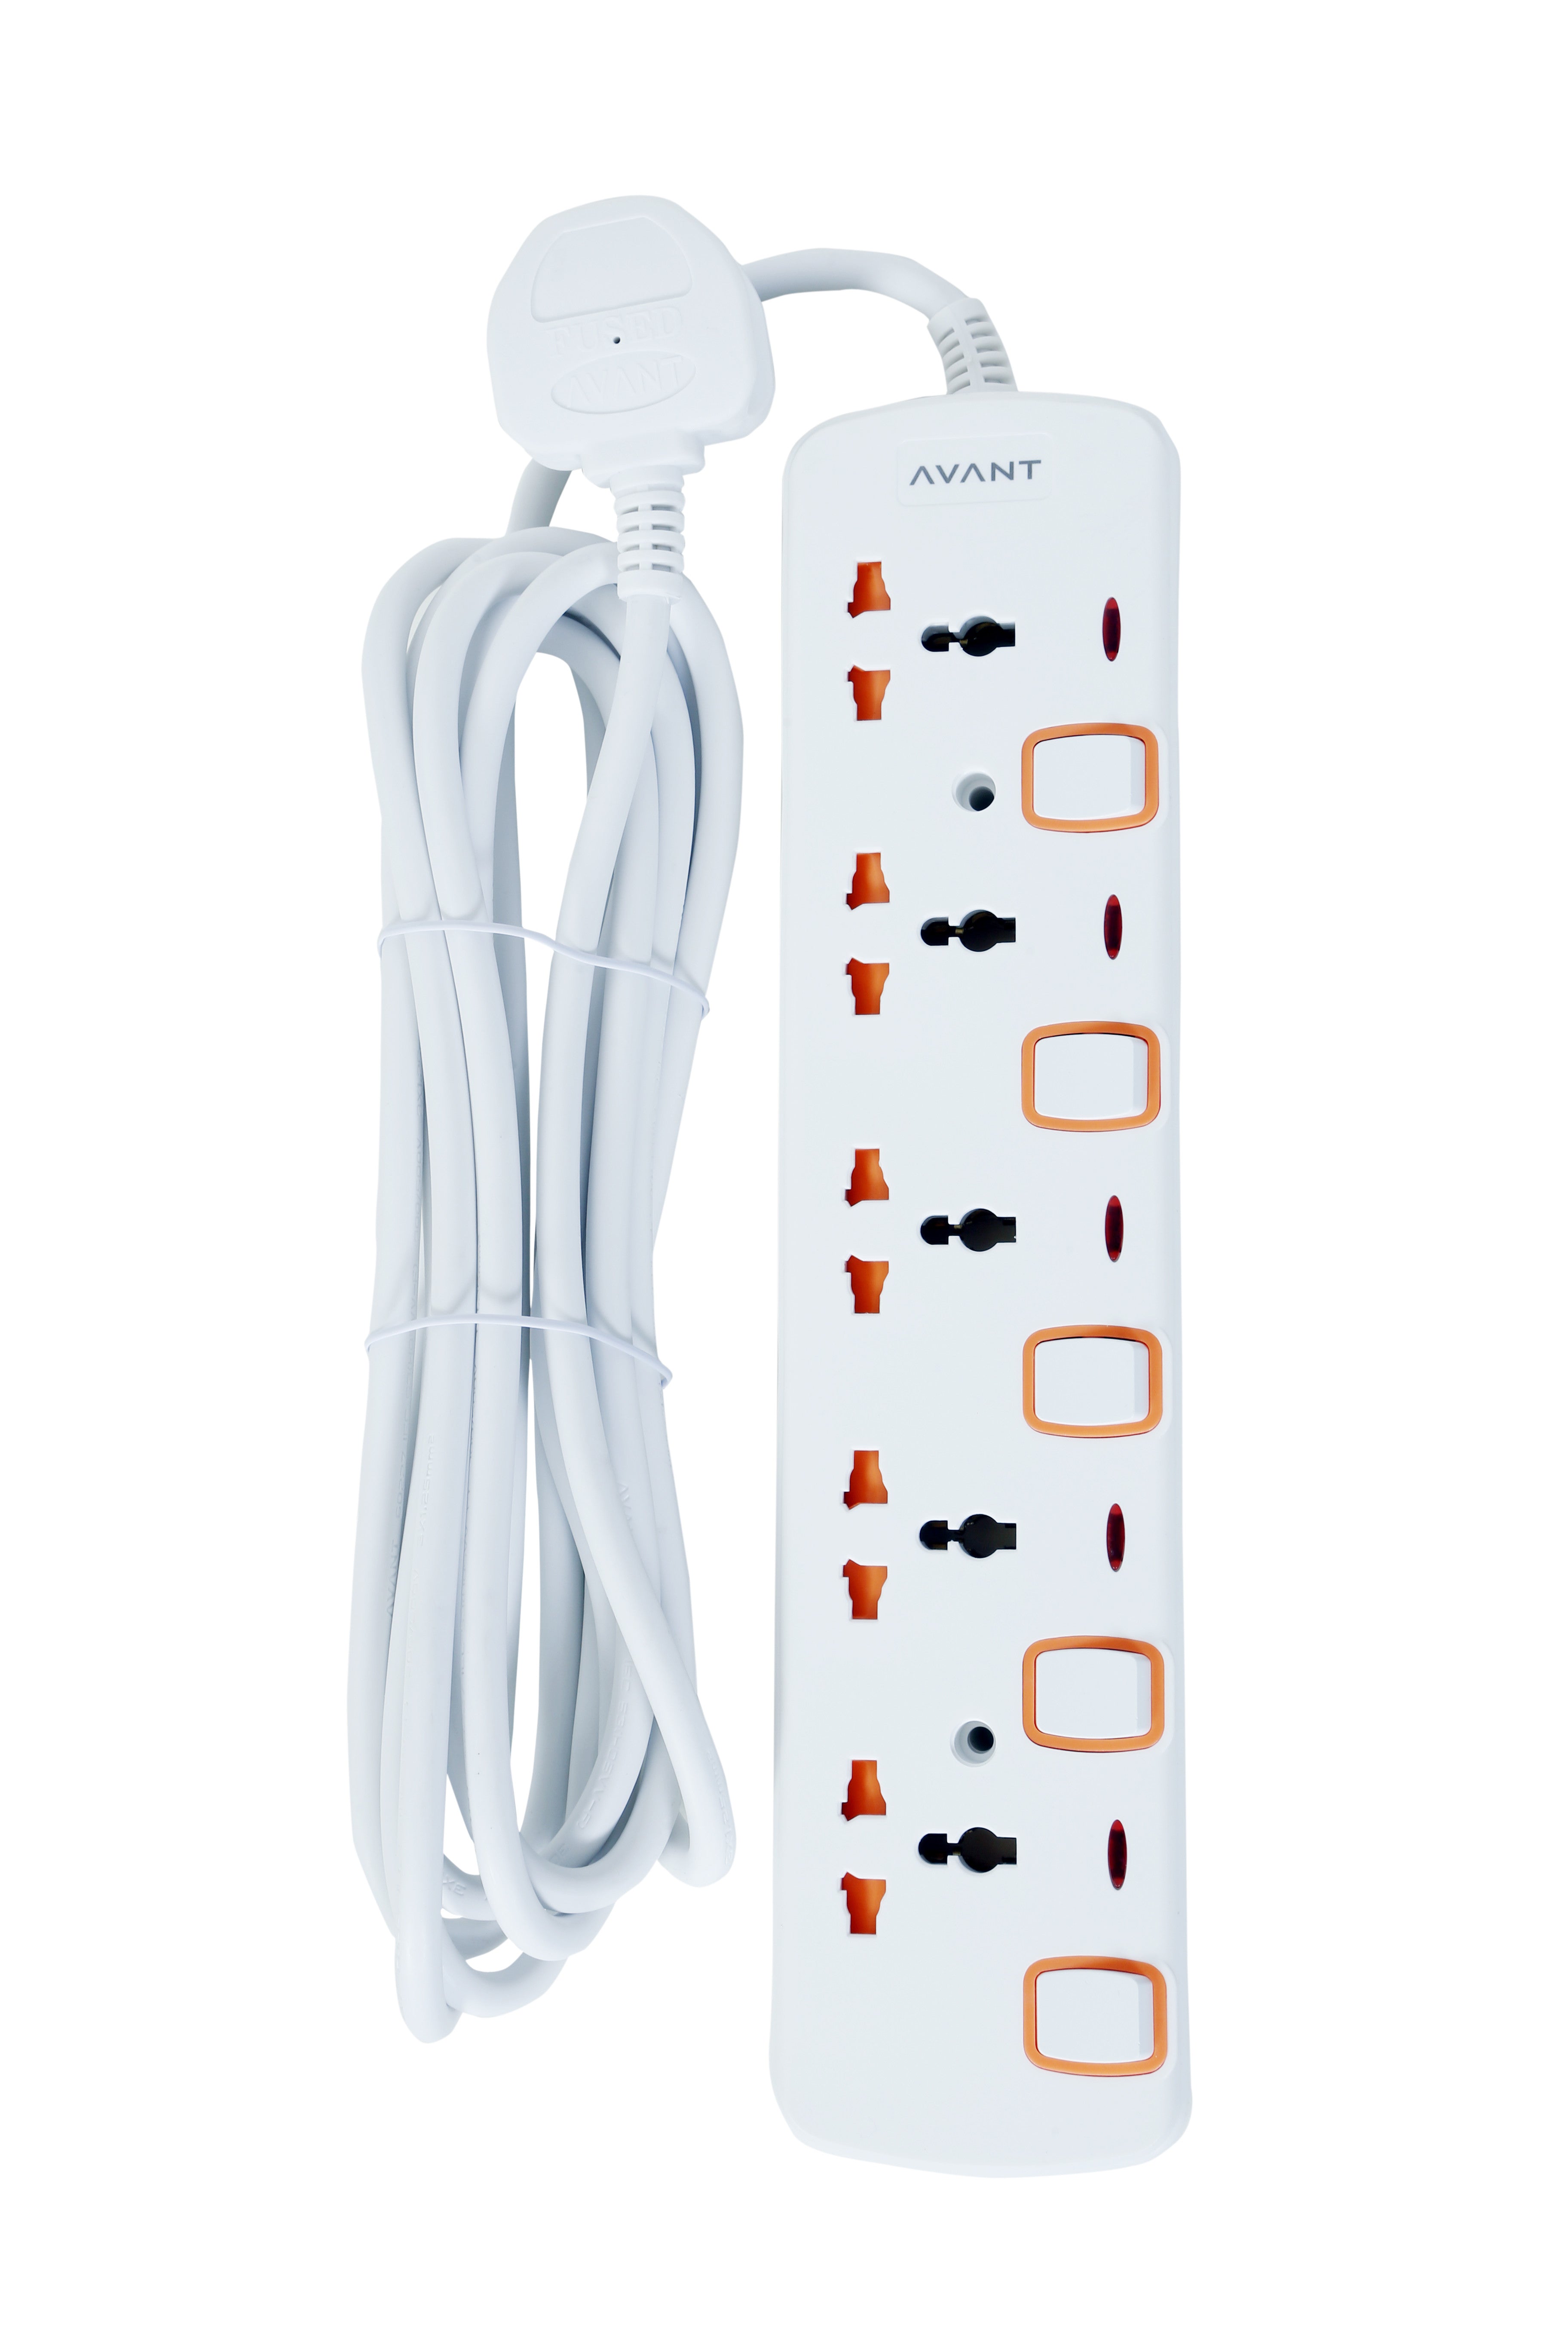 AVANT Extension 5 Way Universal Socket 2 Meter Cord 13A Plug with individual Switches and LED neon Indicator White